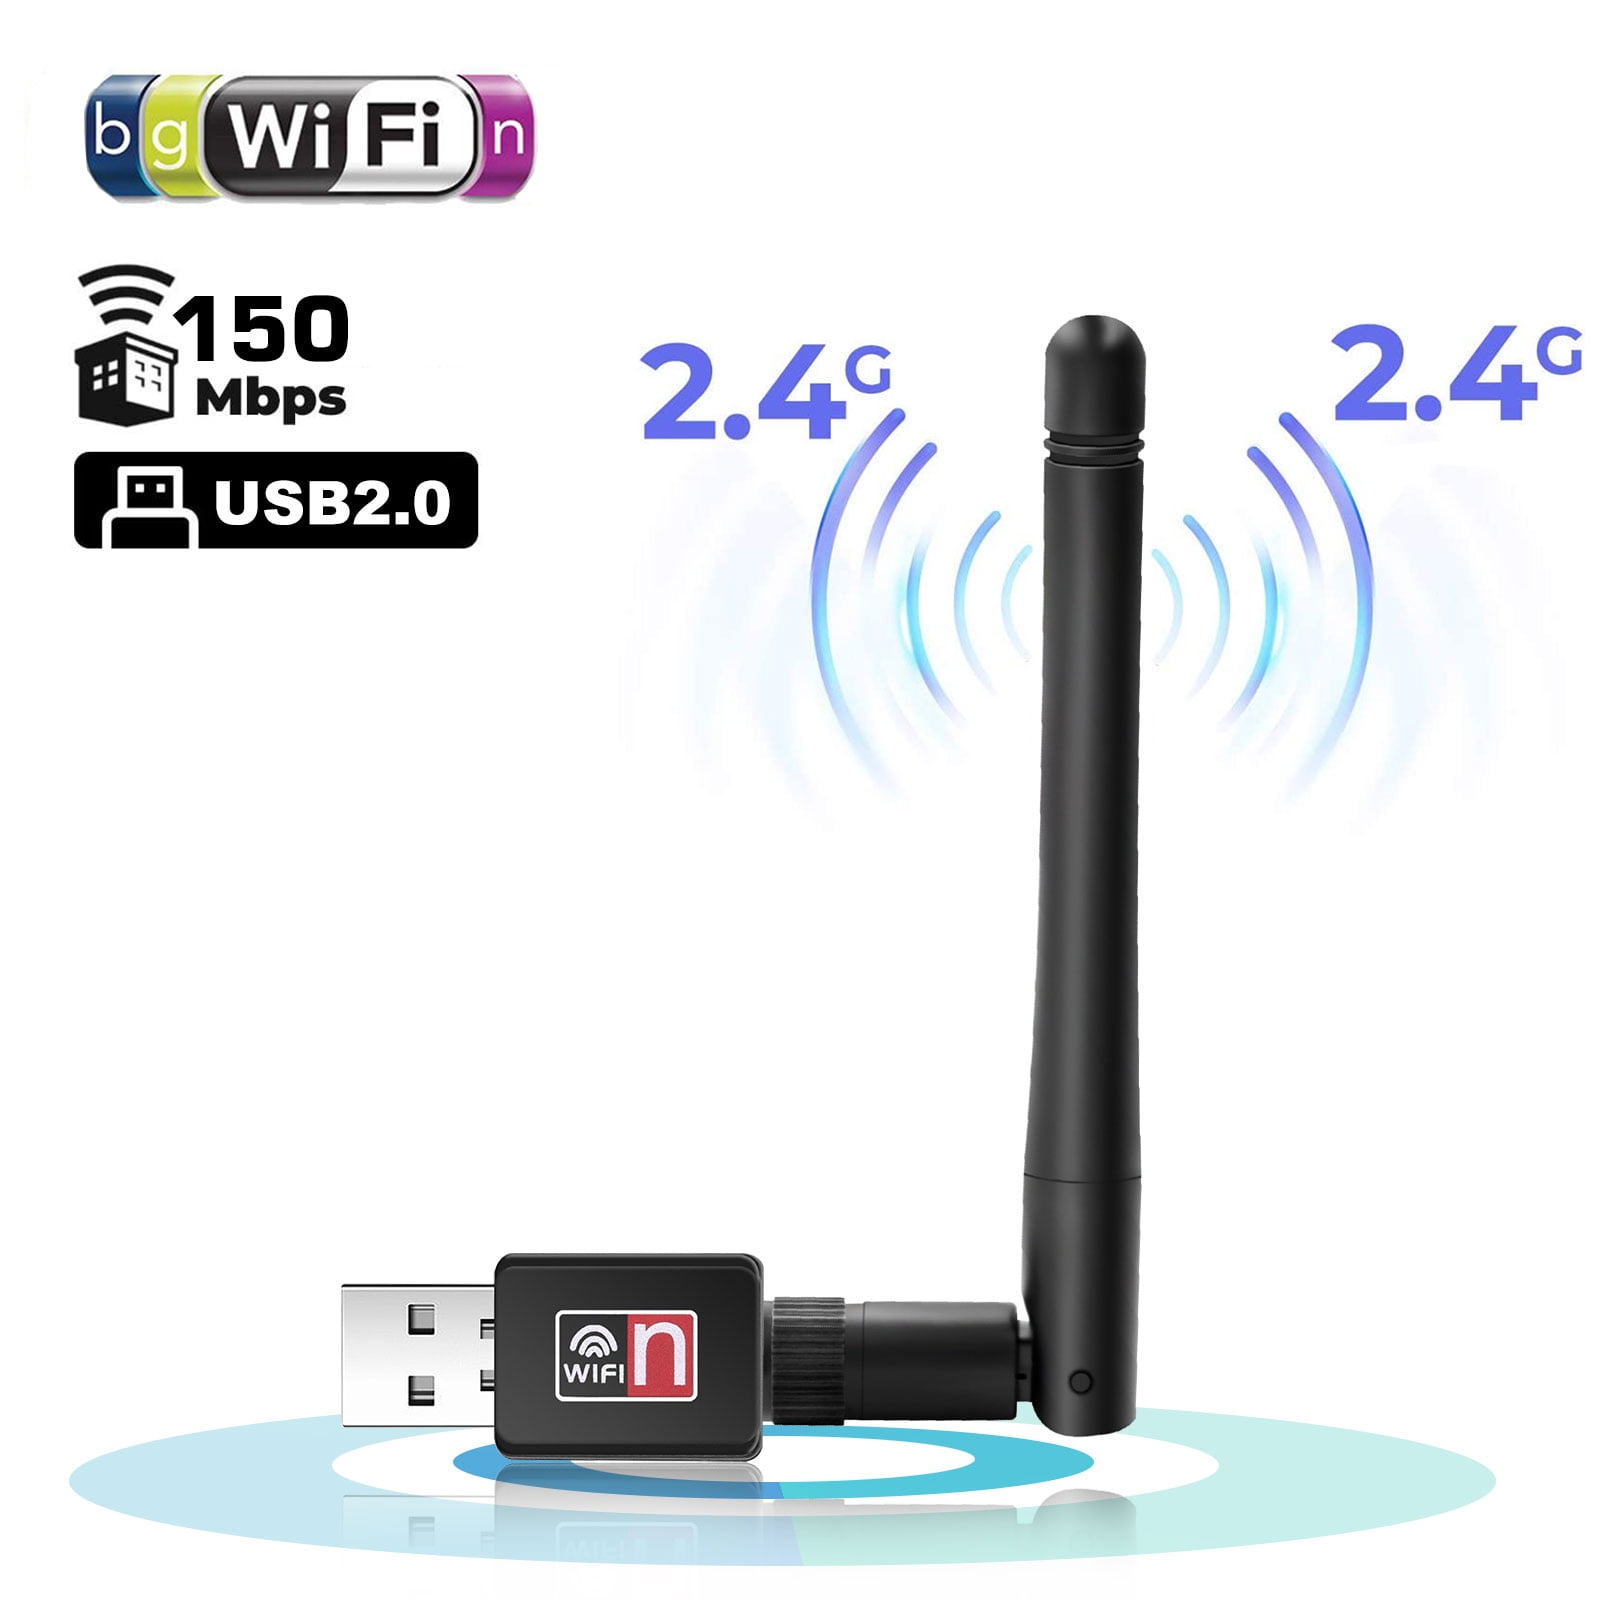 Ylife 600Mbps USB WiFi Adapter with Built-in Driver,2.4GHz/5GHz Dual Band Wireless WiFi Adapter with 5dBi Antenna for Desktop Laptop PC Computer